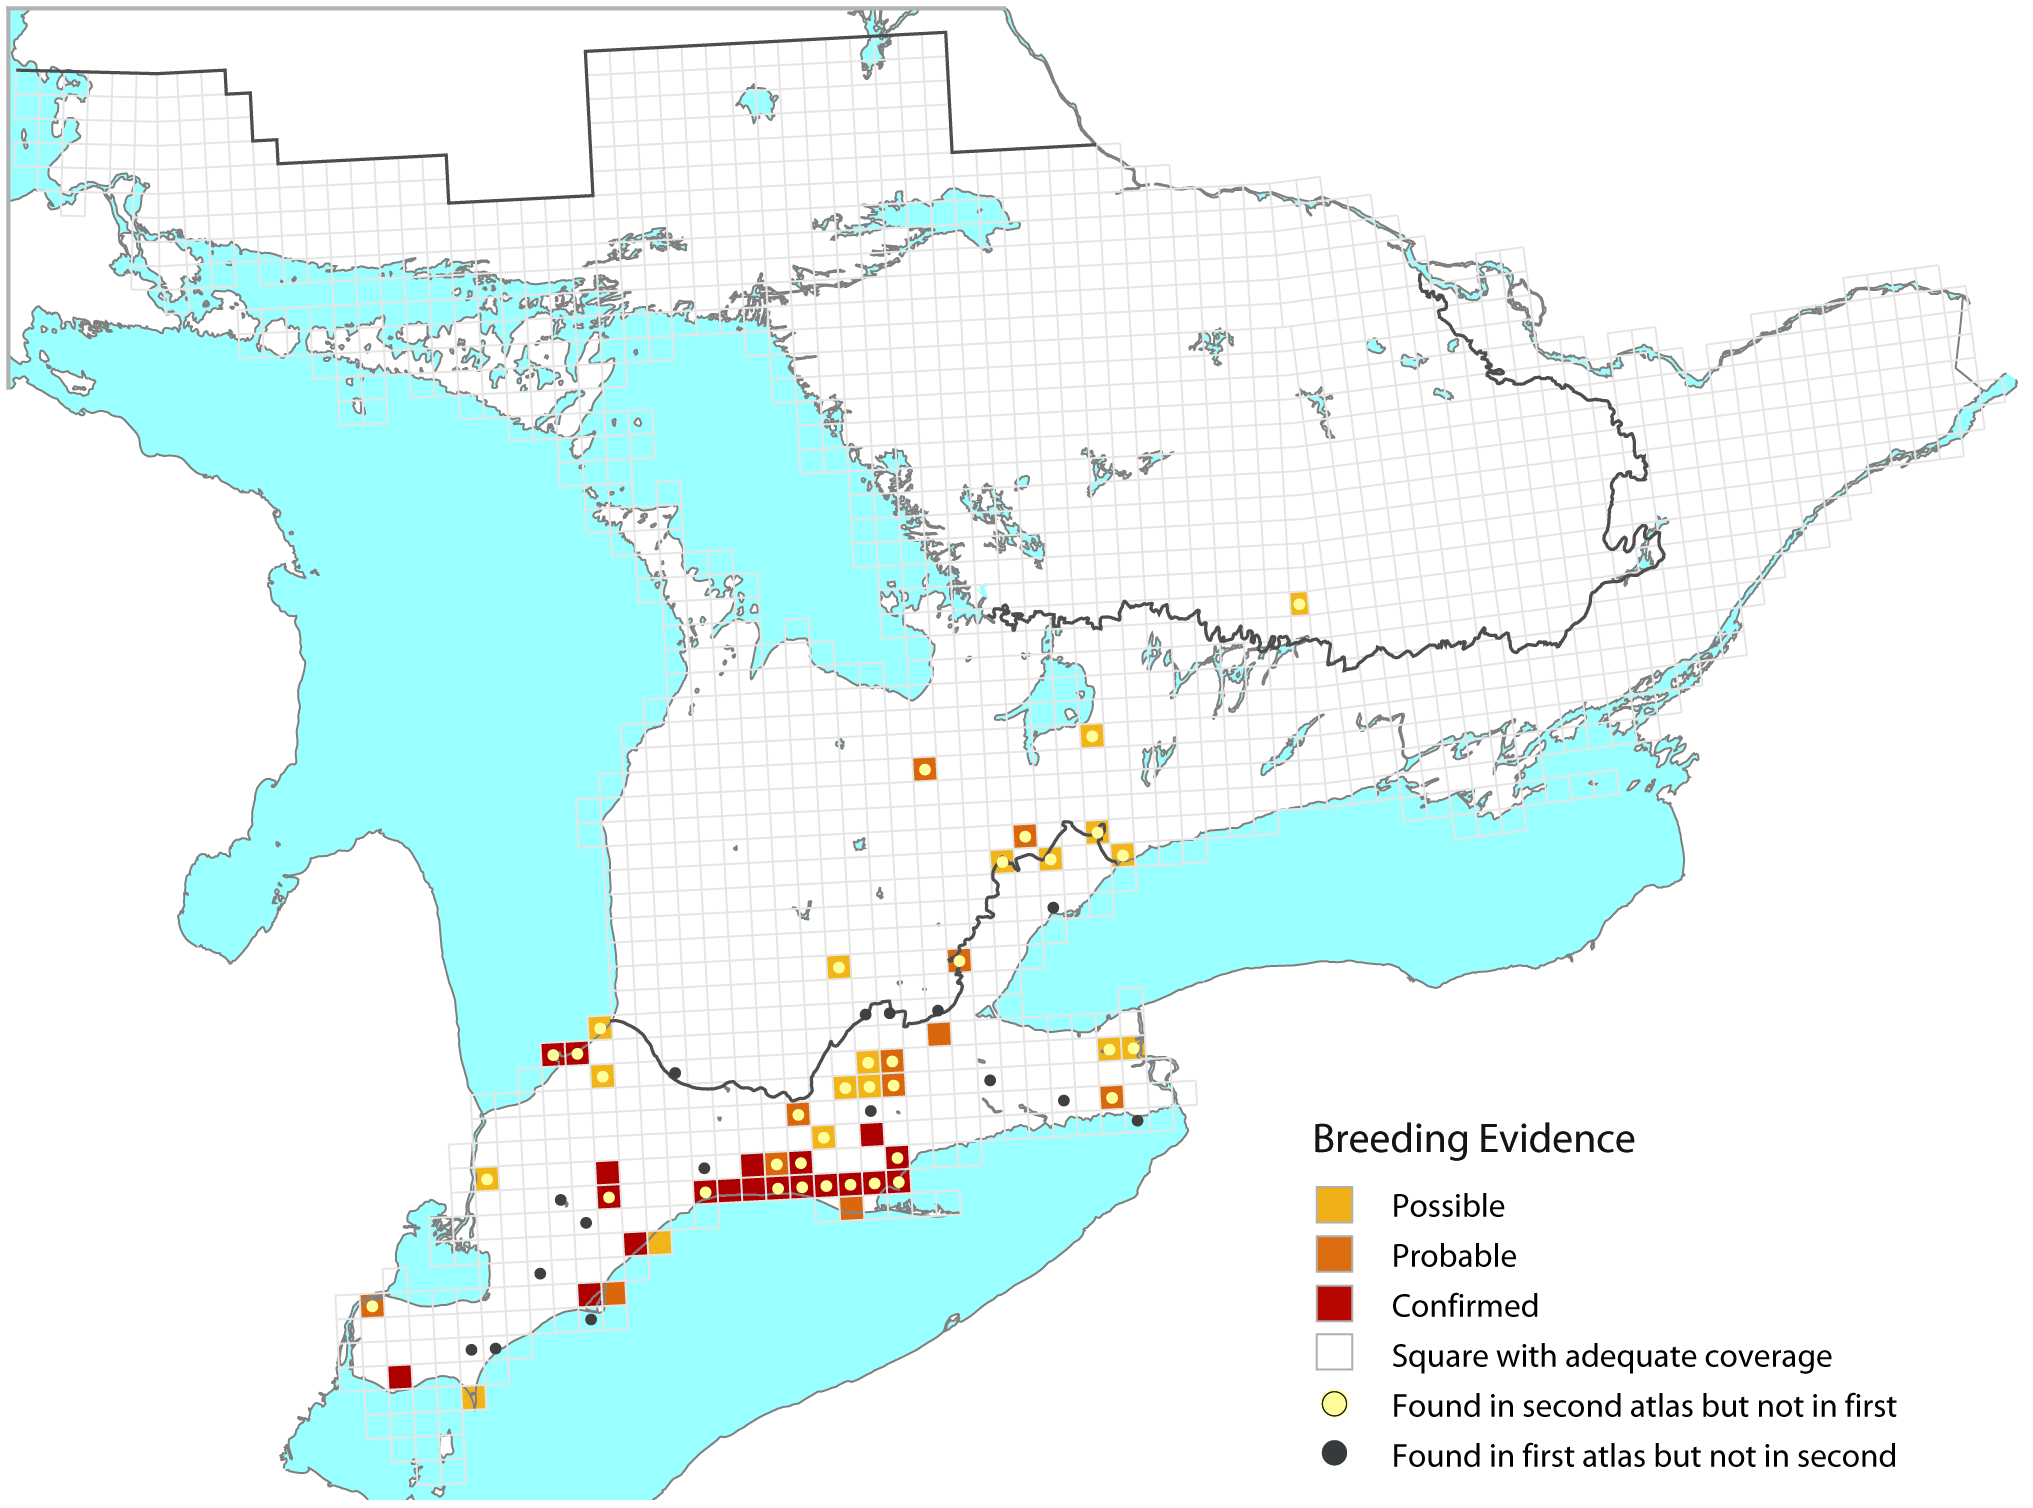 Figure 2 shows the distribution of the Acadian Flycatcher in Ontario. The map is based on Ontario Breeding Bird Atlas data and shows locations with possible, probable, and confirmed breeding evidence.